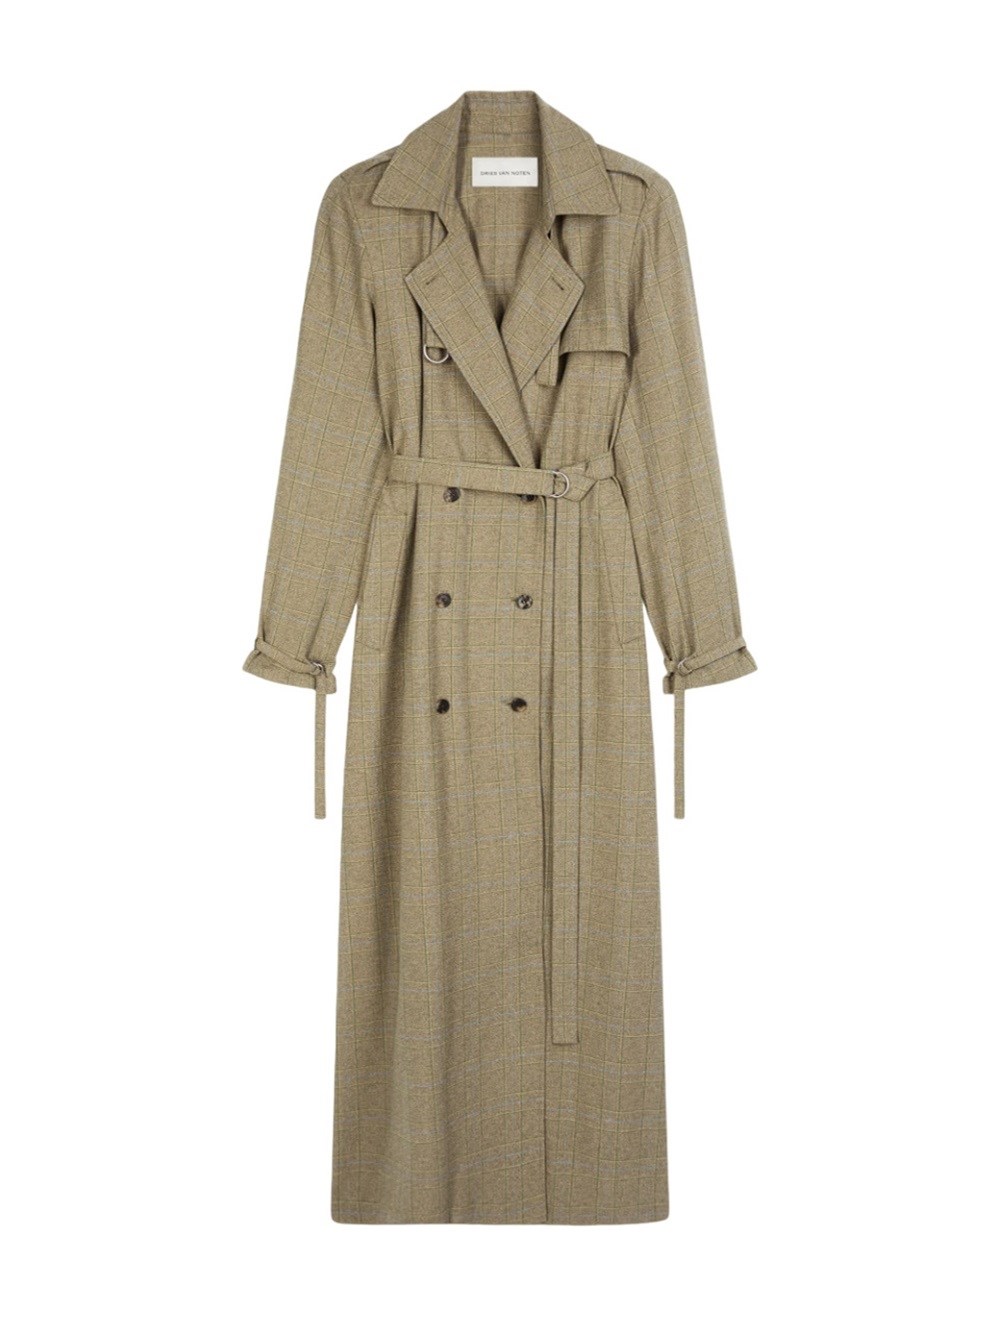 Shop Dries Van Noten Floor-length Trench Coat, With A Loose Fit, In Prince Of Wales Check. In Green